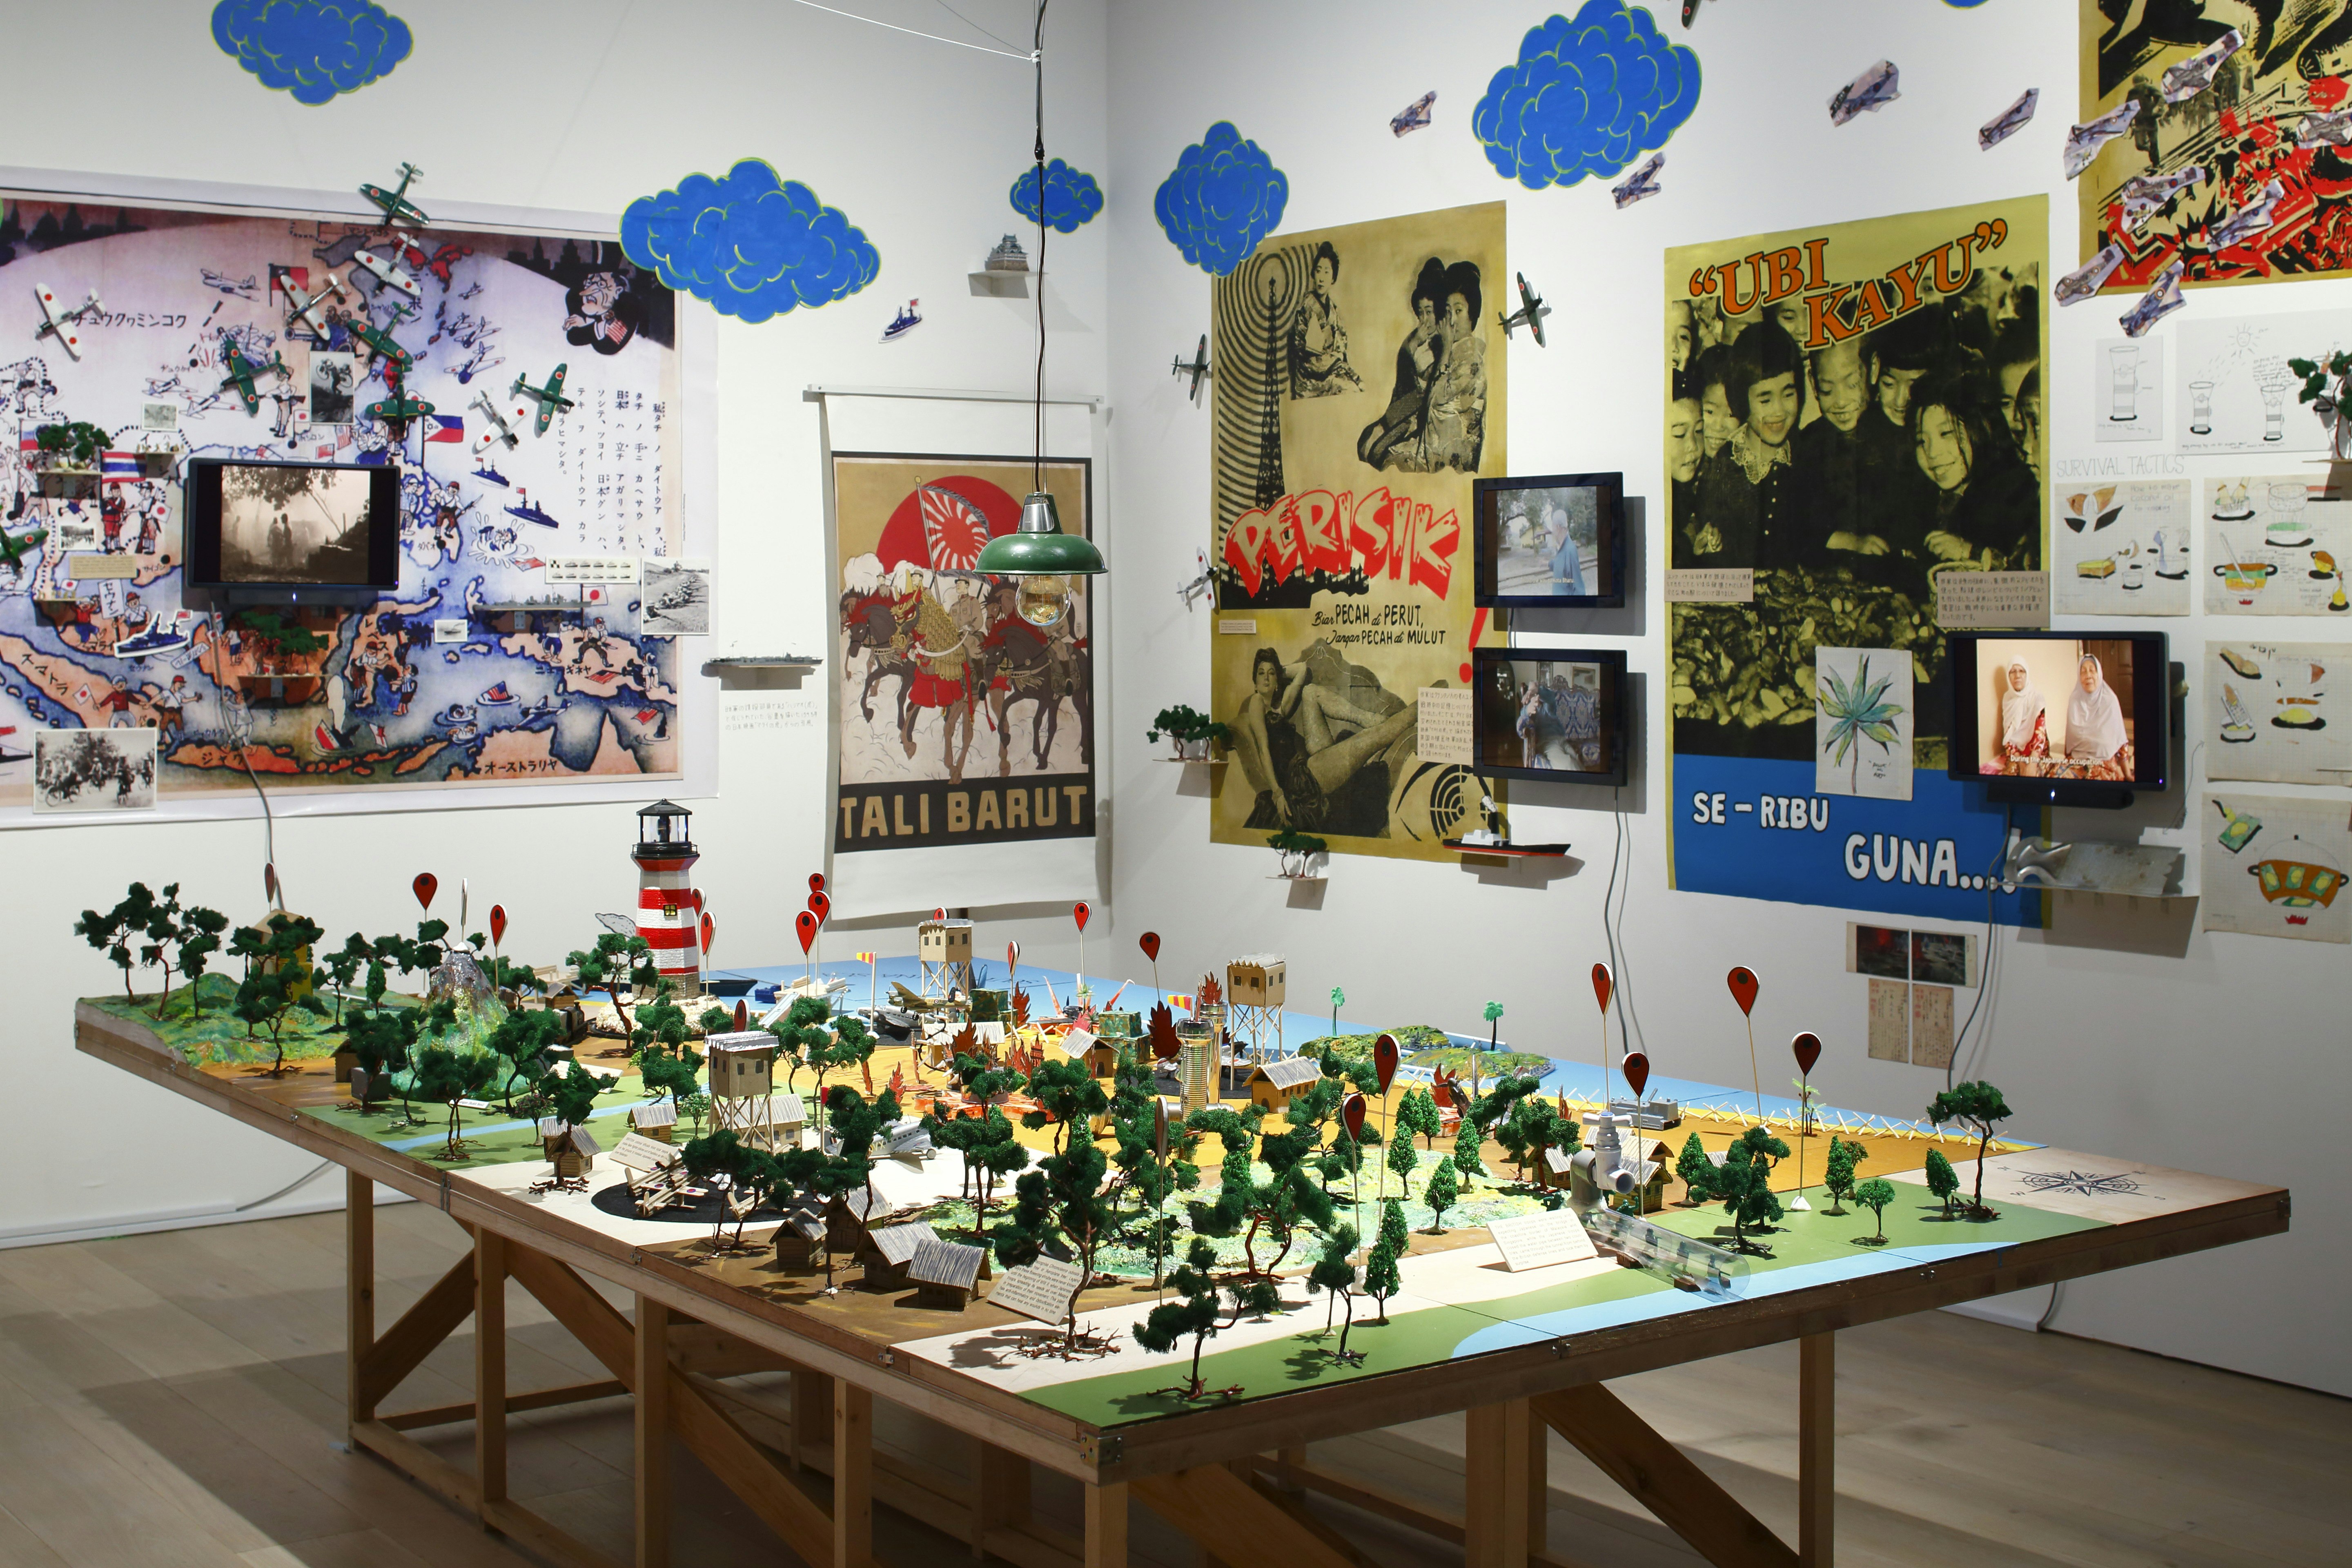 A miniature scene of a forest, drop pins, viewing towers and a lighthouse set up on a drafting table. On the walls are colourful pop-art style posters printed with Indonesian slogans. Blue cloud decals and stickers of military aircraft are stuck on the walls.   